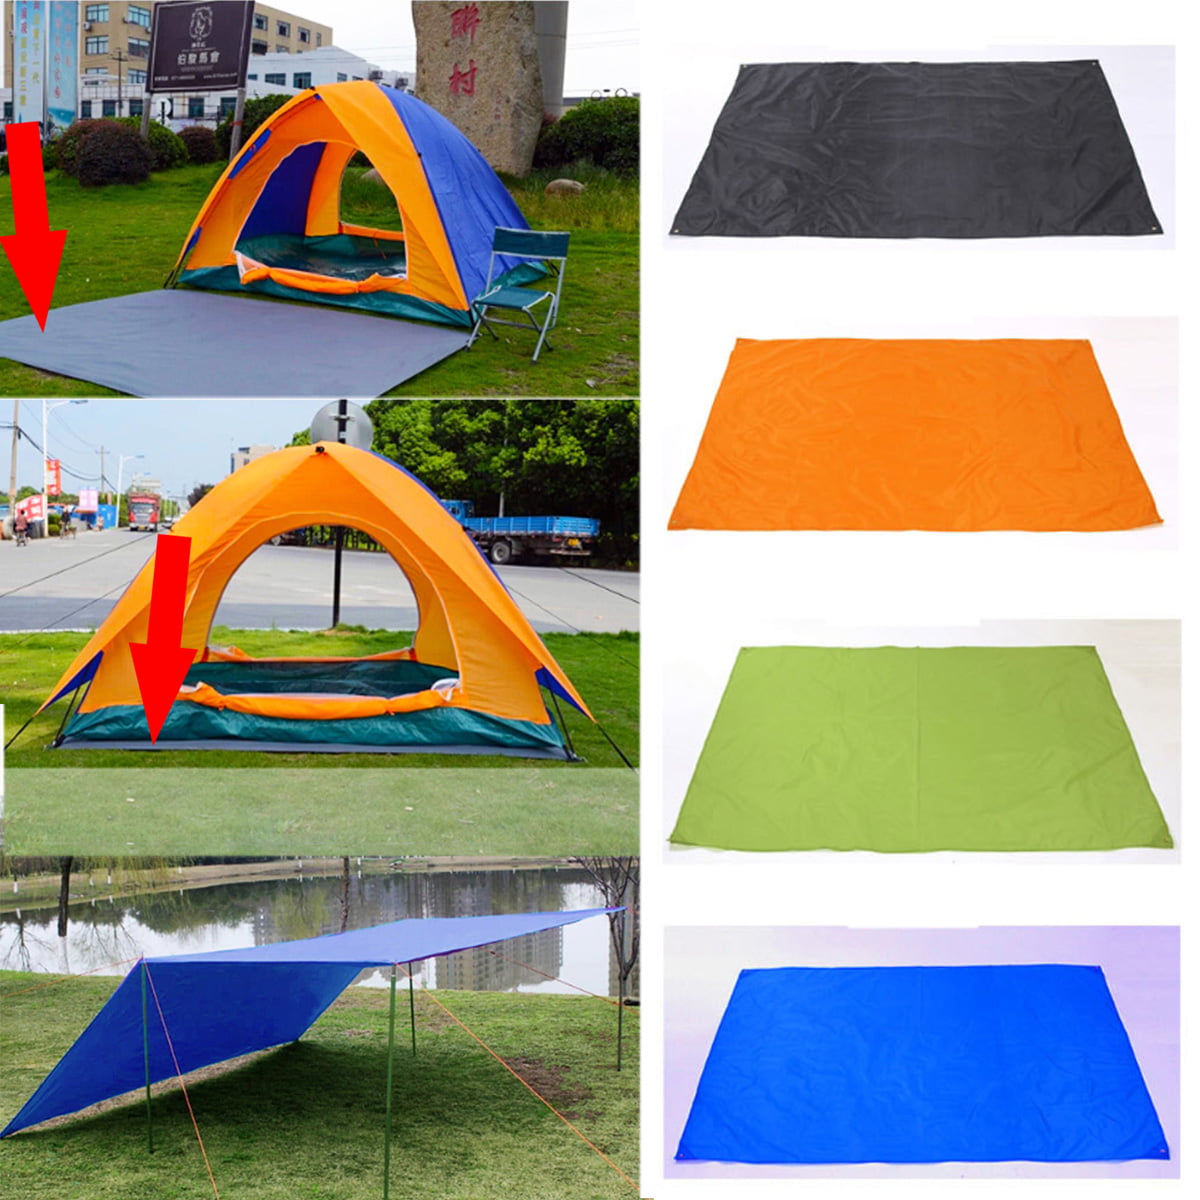 Great for Hiking Backpacking & Travel Use for Shelter Or Sunshade Perfect Tent Cover Or Hammock Rain Fly Waterproof Rip Resistant Camping Tarp for Any Weather